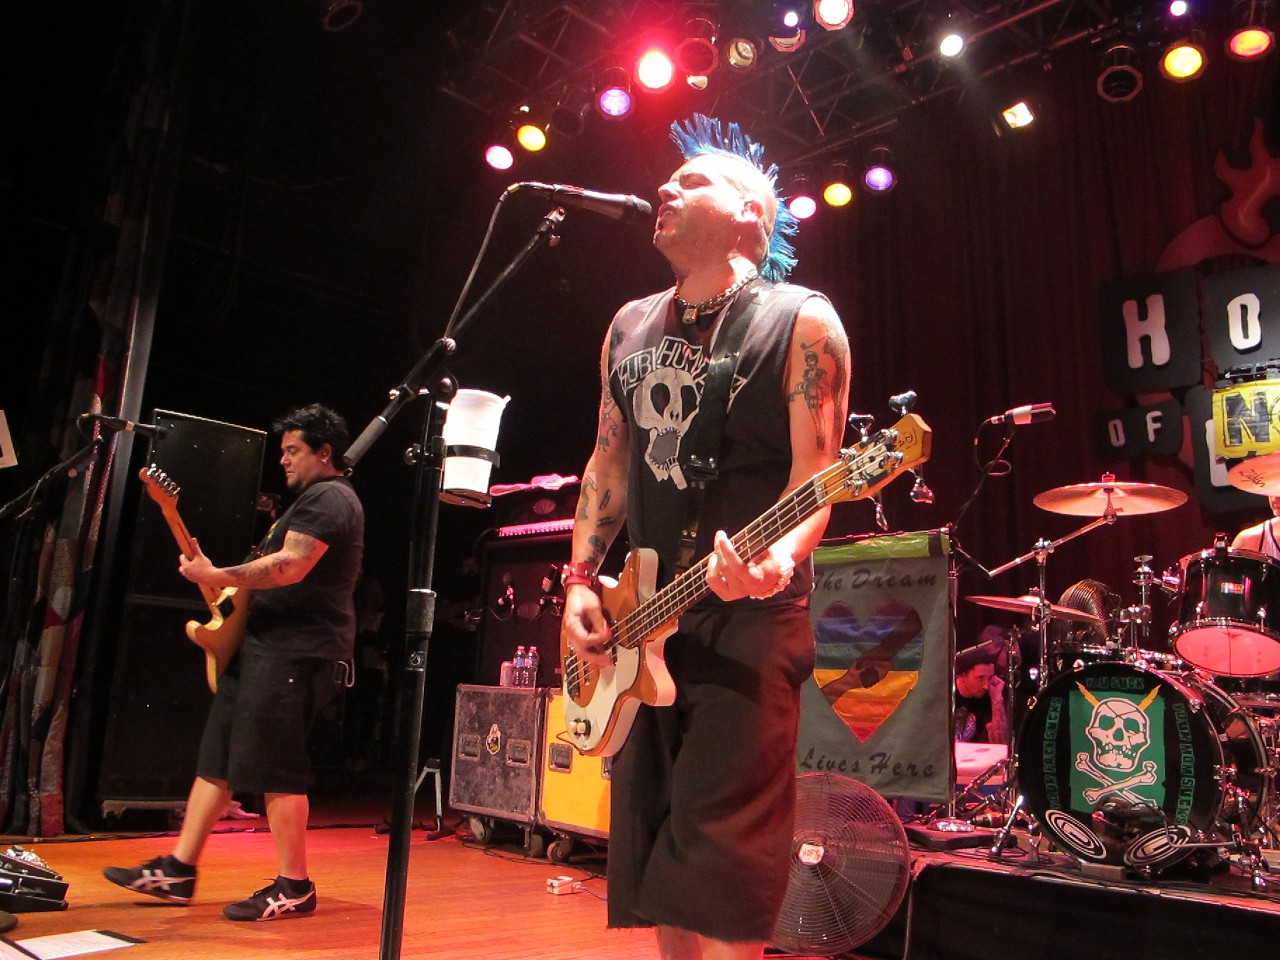 NOFX Performing at House of Blues